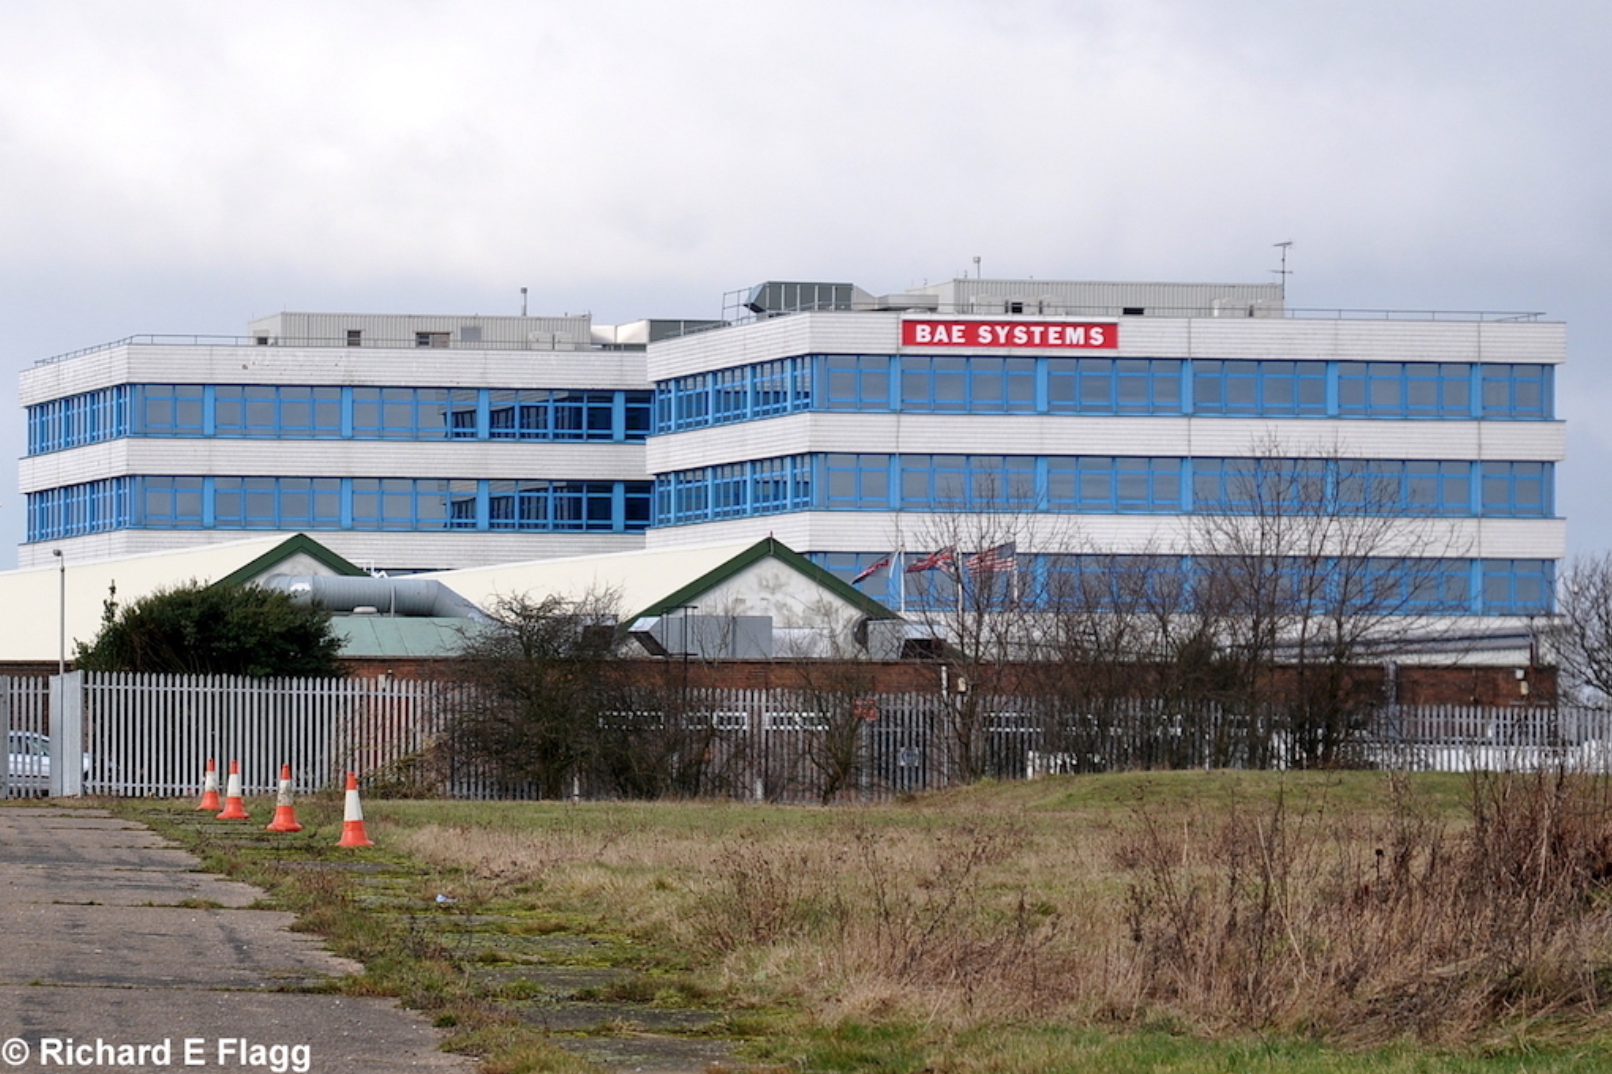 008BAE Systems Factory Site - 16 November 2013.png